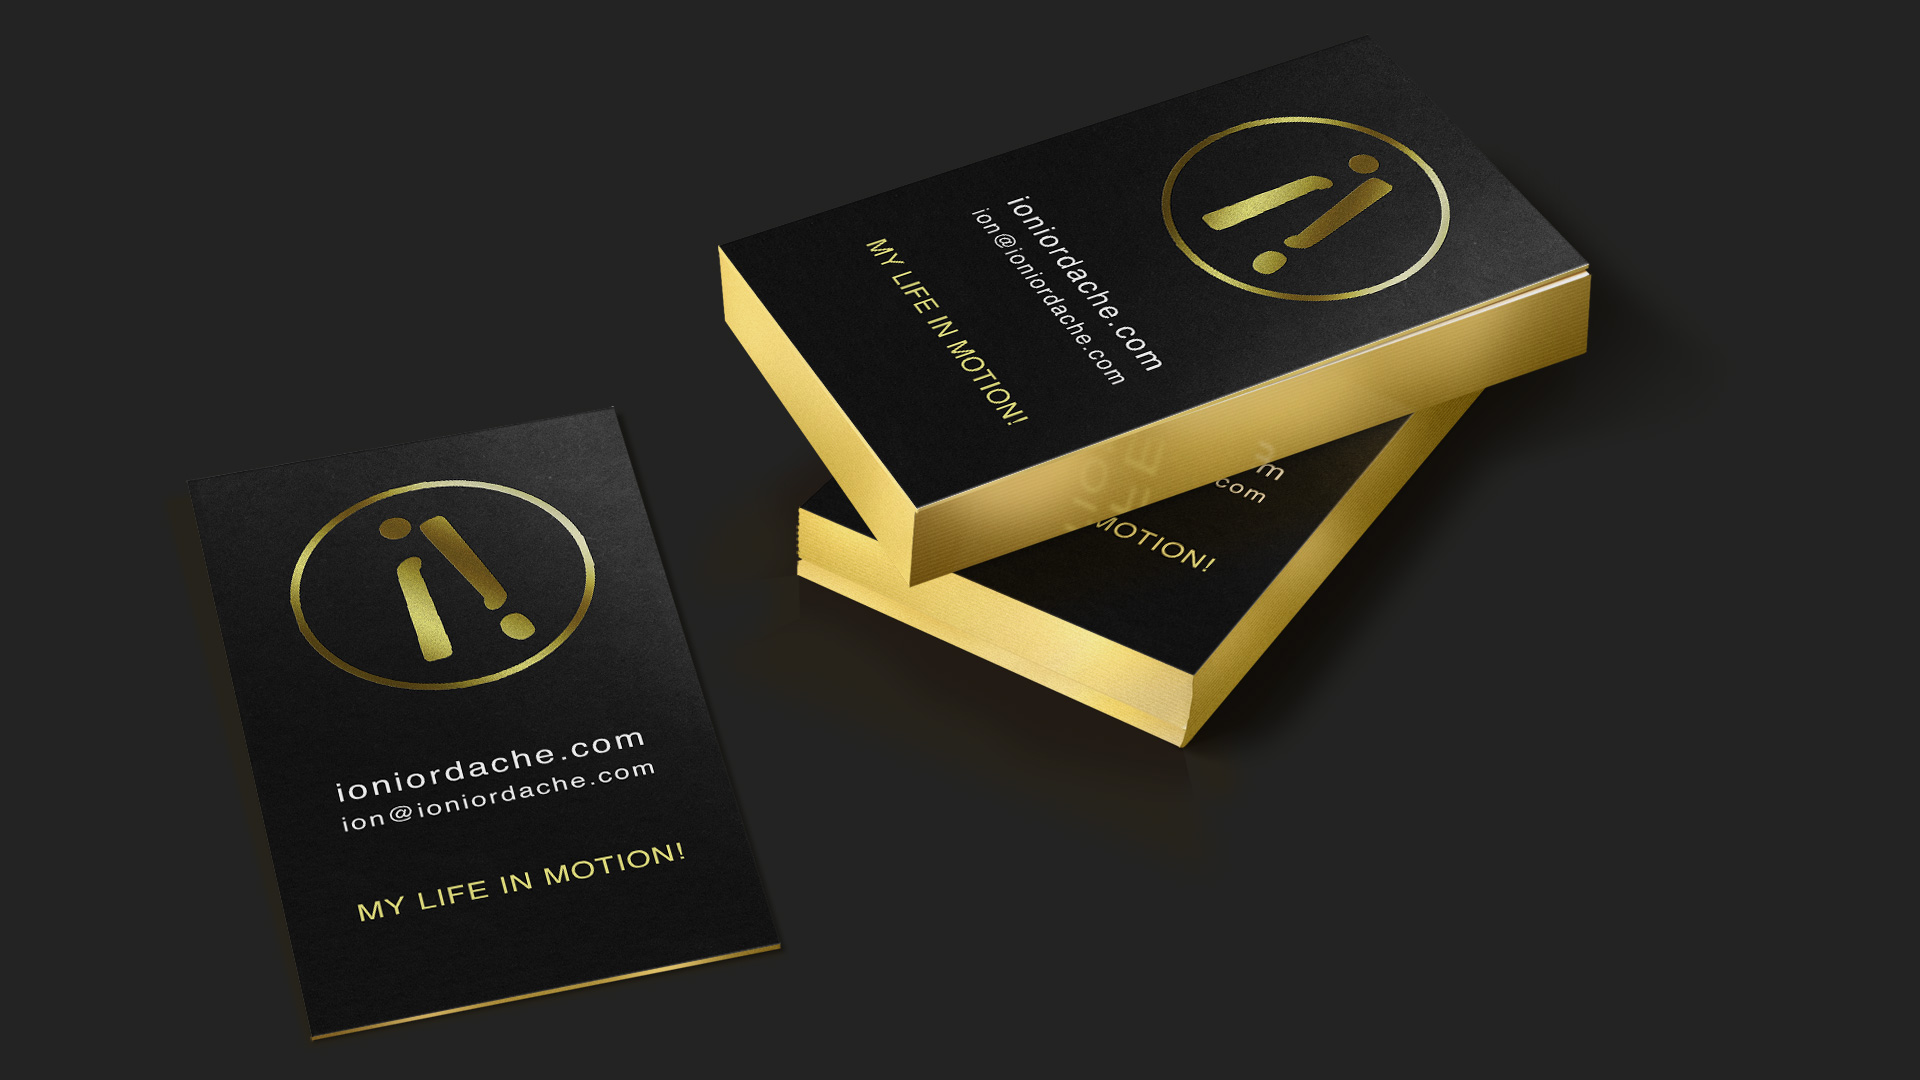 This picture, created by PixelUp, showcases Ion Iordache's business card design adorned with golden tones, set against a dark grey background. Three sets of business cards are arranged, with two stacked atop each other and one placed beside them. The cards are black with gold edges and intricately engraved in gold. Ion Iordache's brand identity is among PixelUp's endeavours.